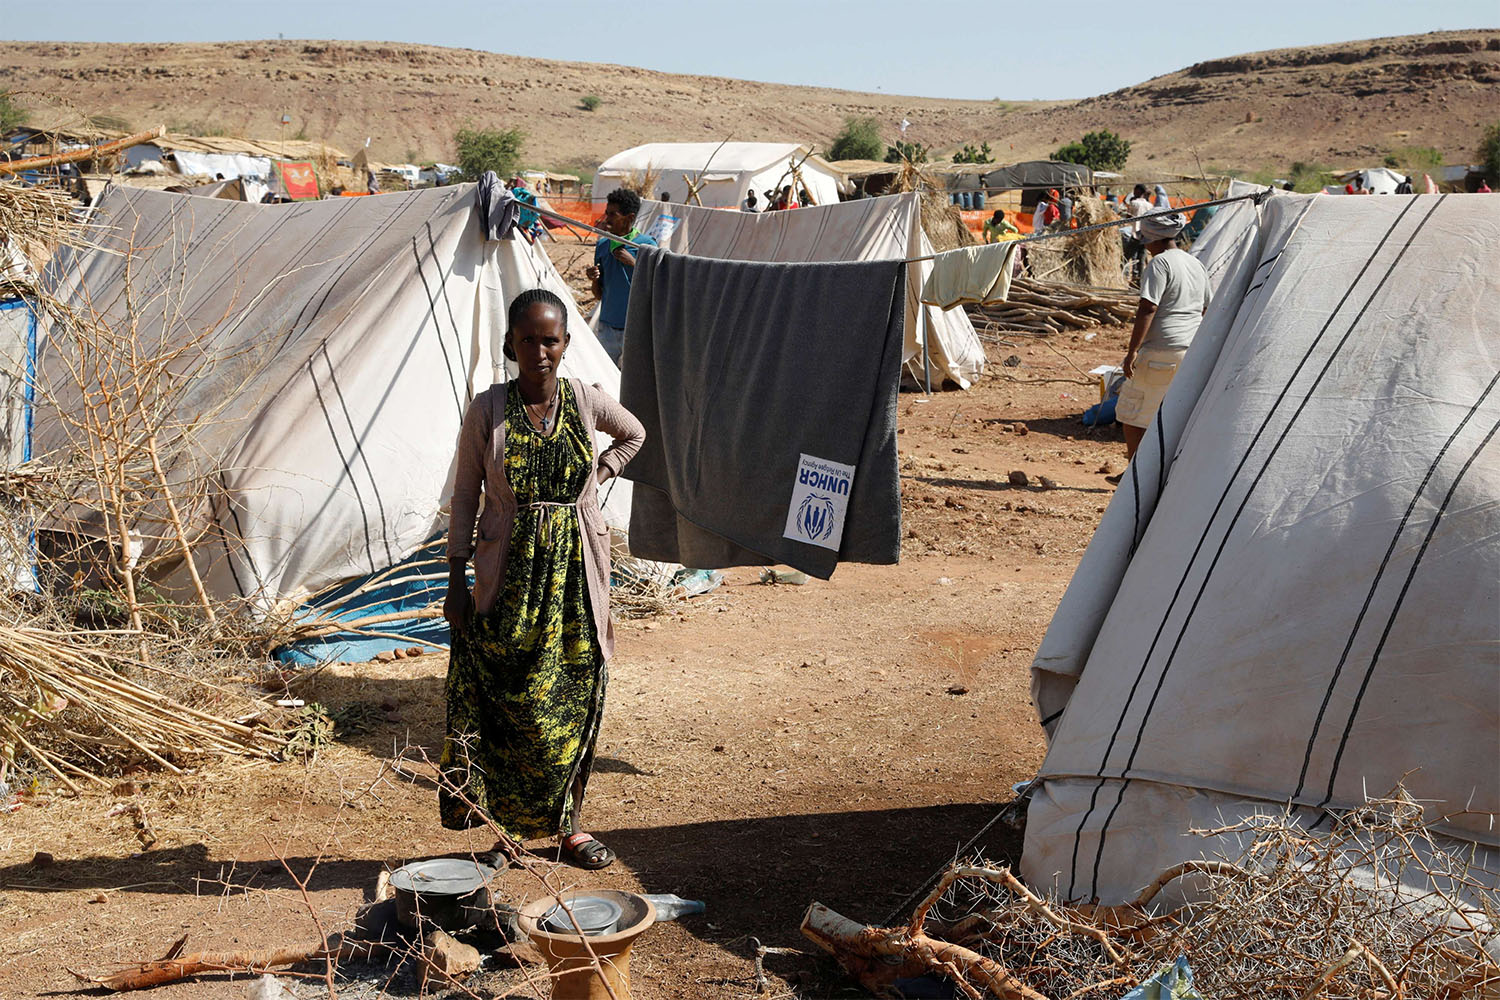 More than 60,000 people have also fled Tigray and taken refuge in Sudan